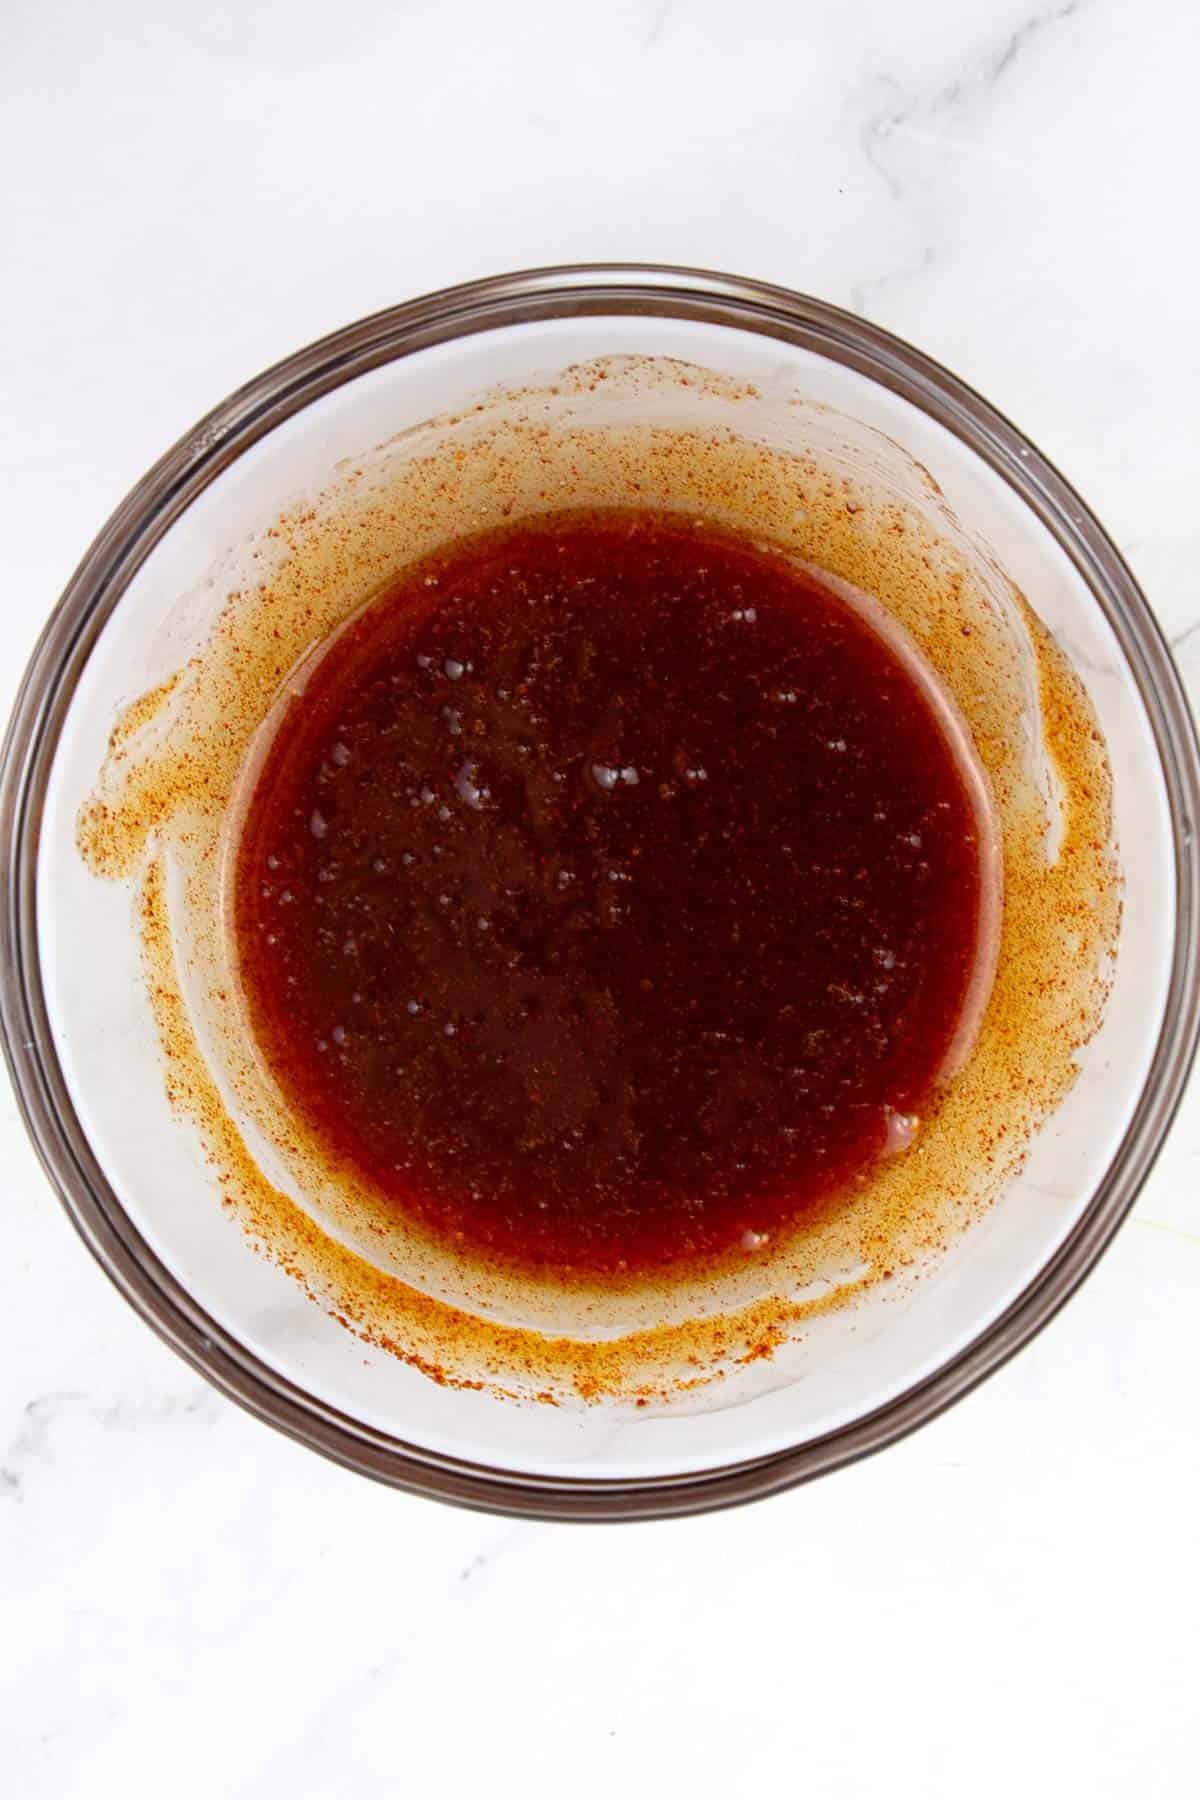 Bowl of hot honey sauce prepared before drizzling over popcorn.